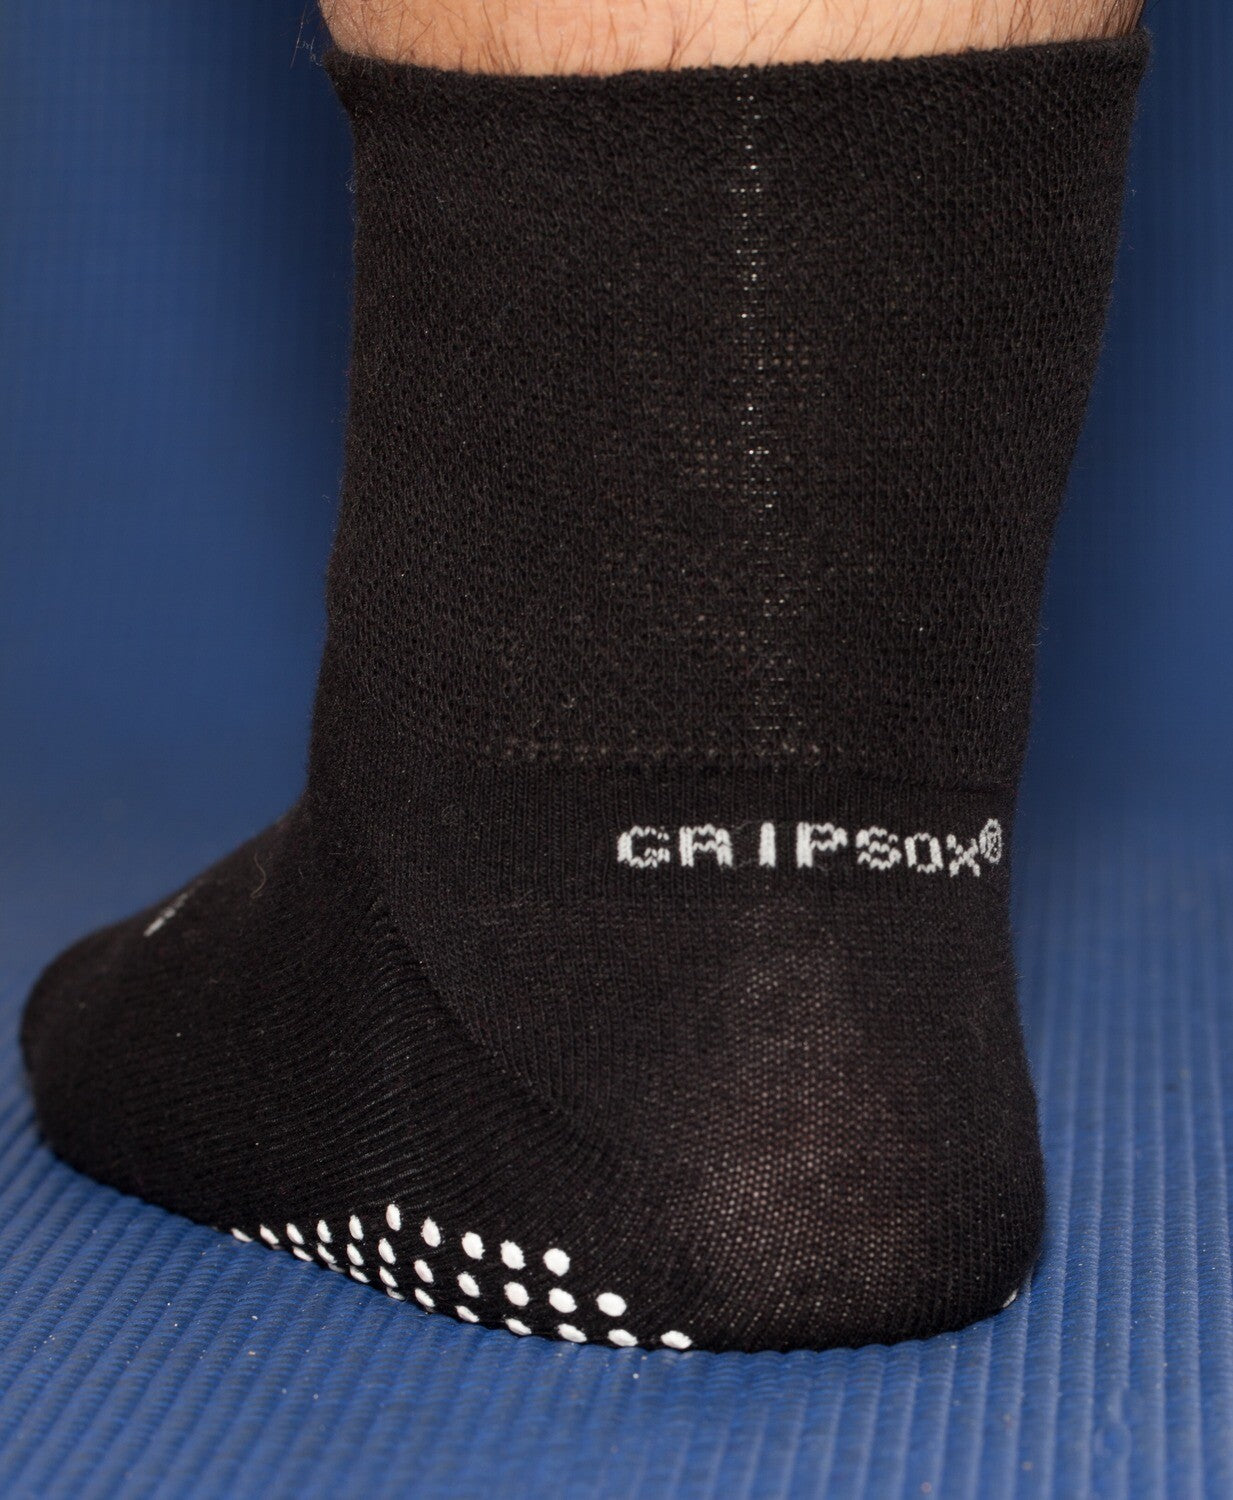 GripSox Stretch Top Non-Slip Socks for Hospital/Home